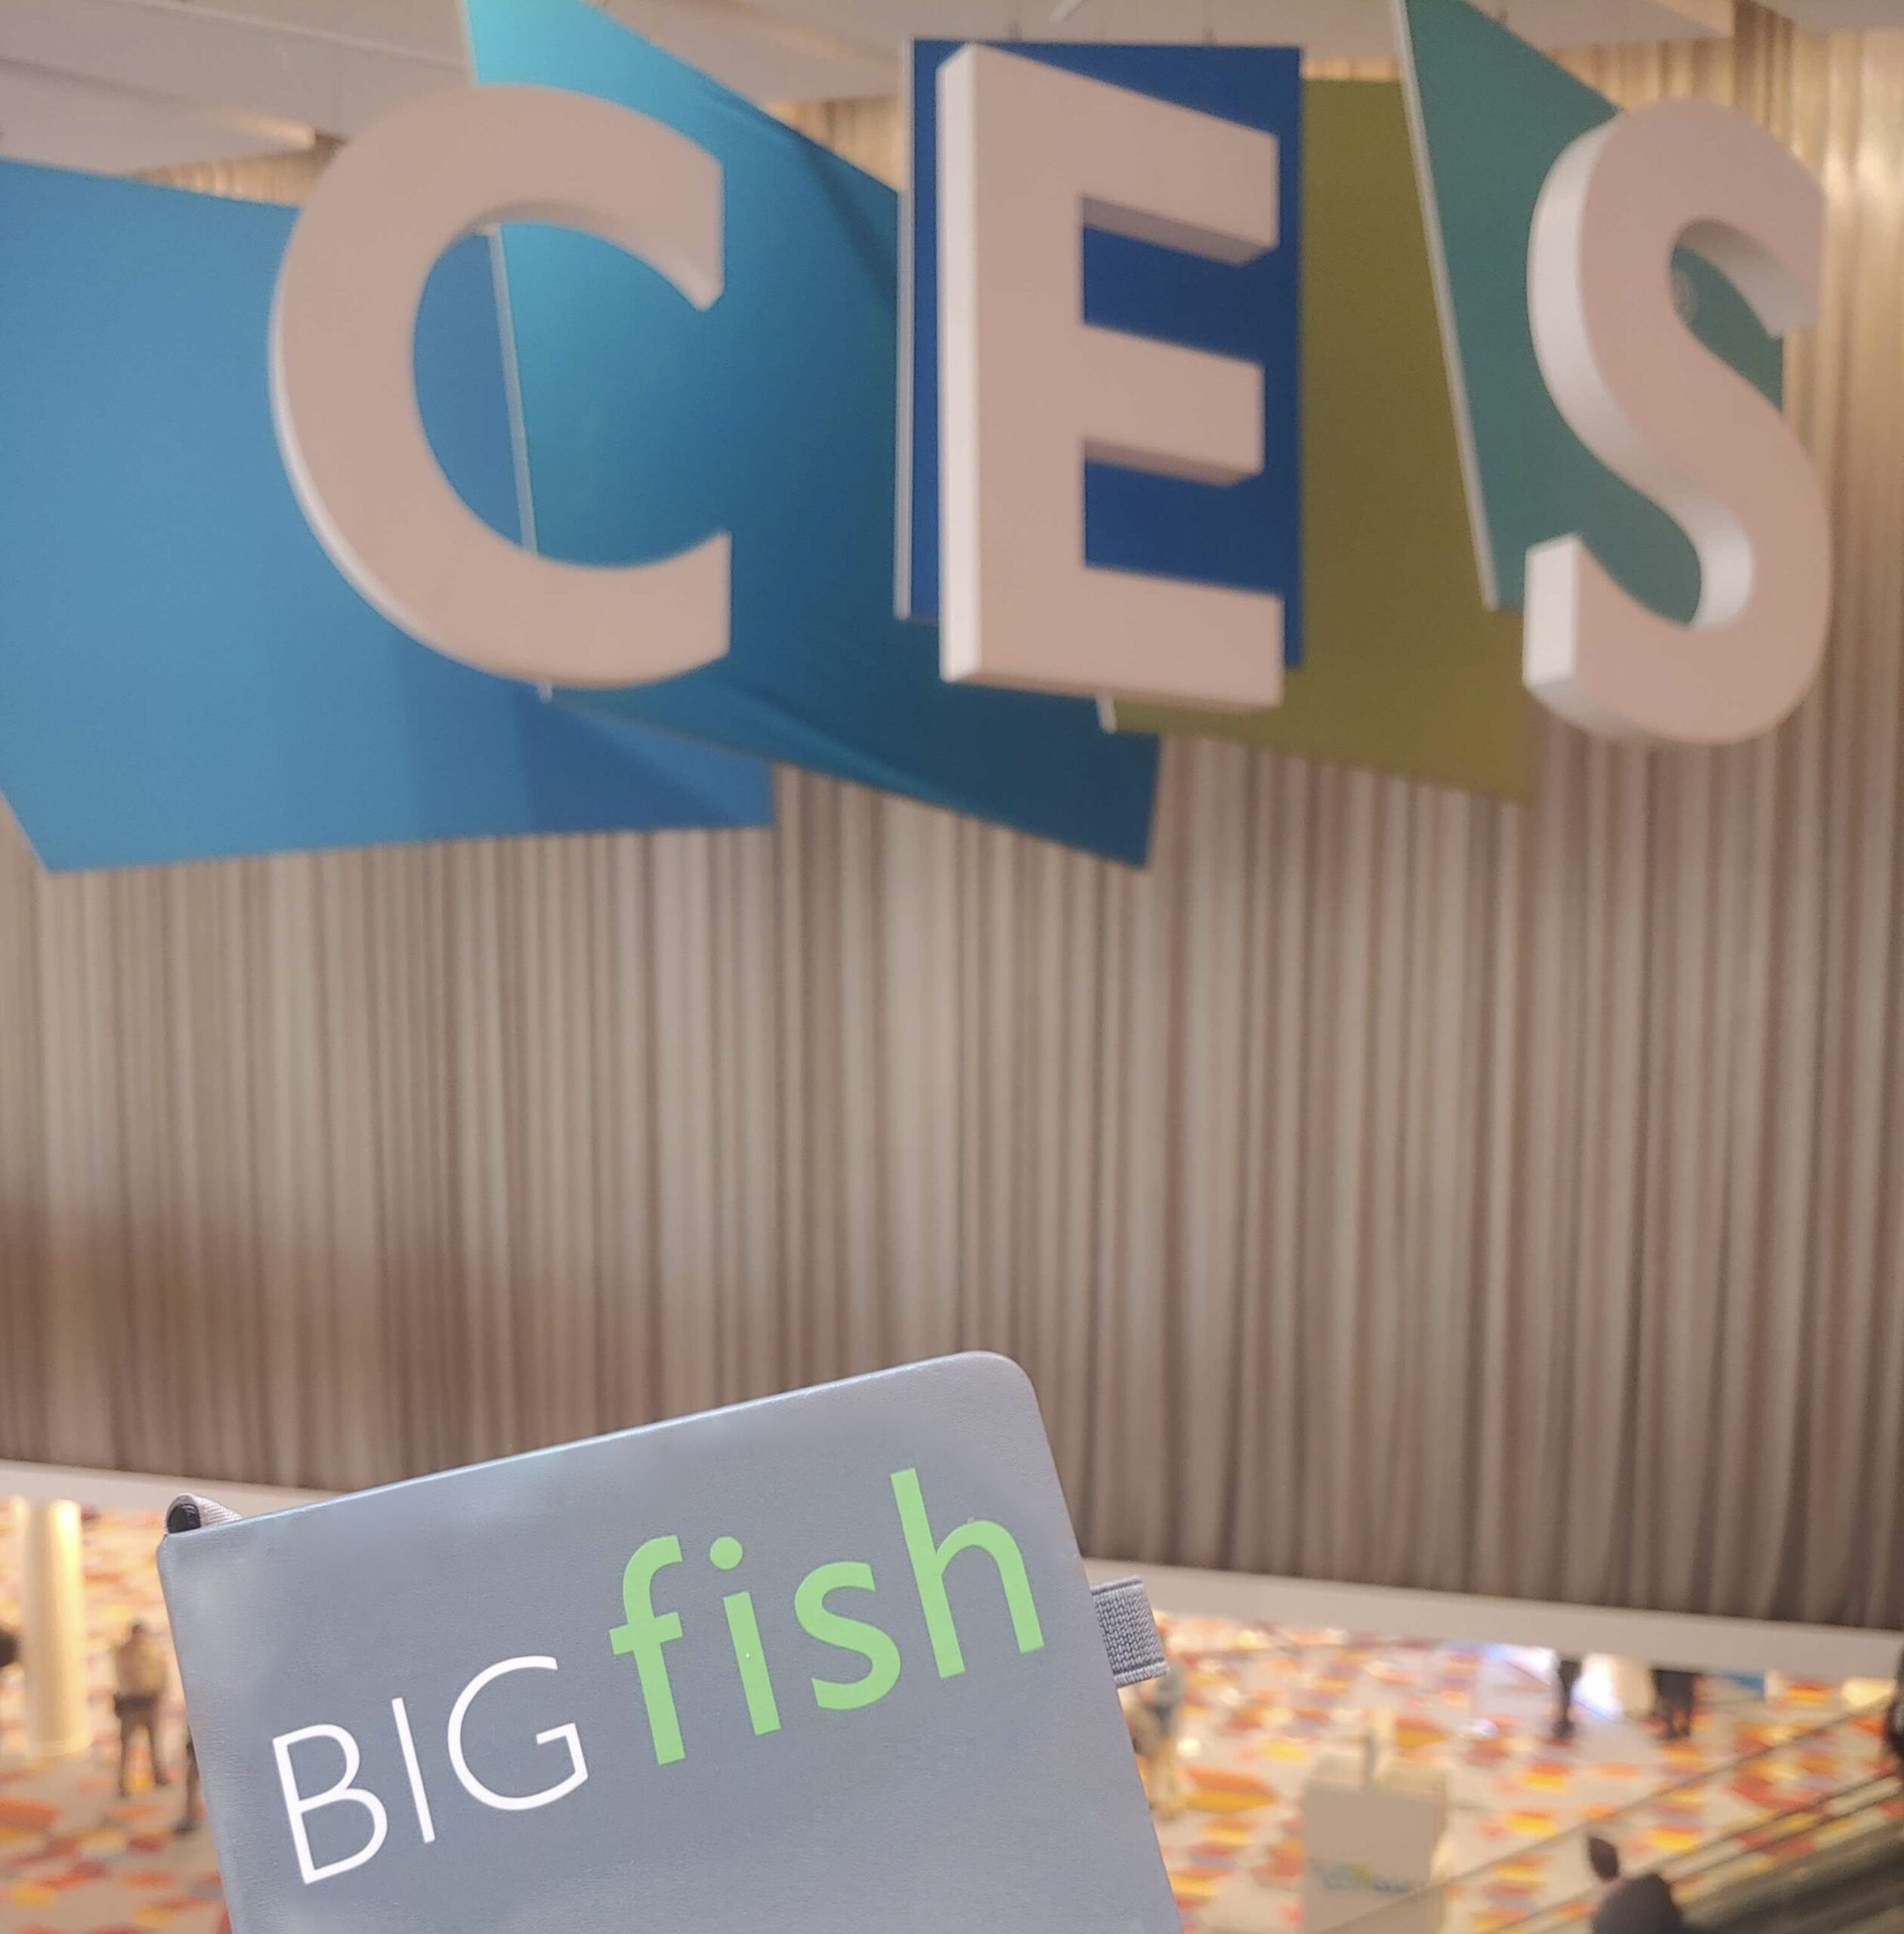 CES is Back: After 2 Years of COVID Concerns the Tech Show Bounces Back!